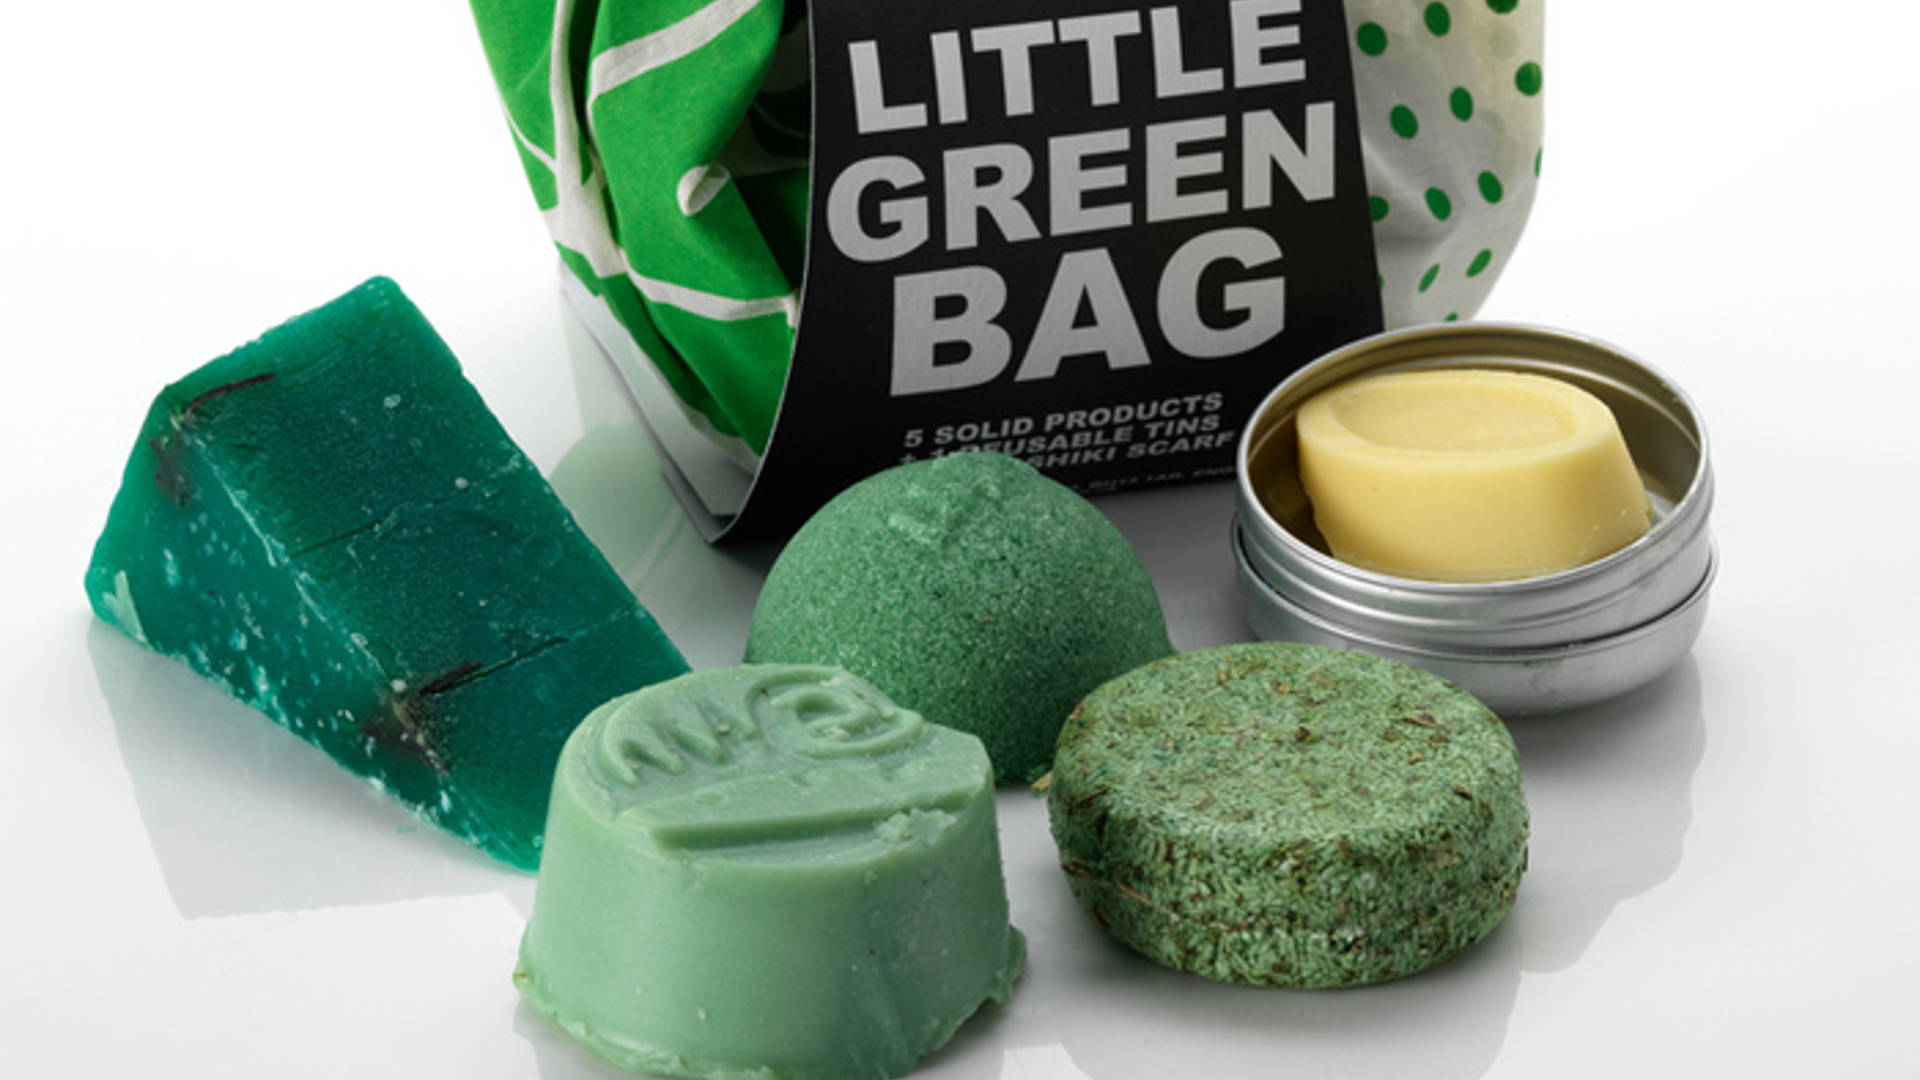 Featured image for The Dieline Package Design Awards 2013: Personal Care & Clothing, 2nd Place - Lush, Little Green Bag 